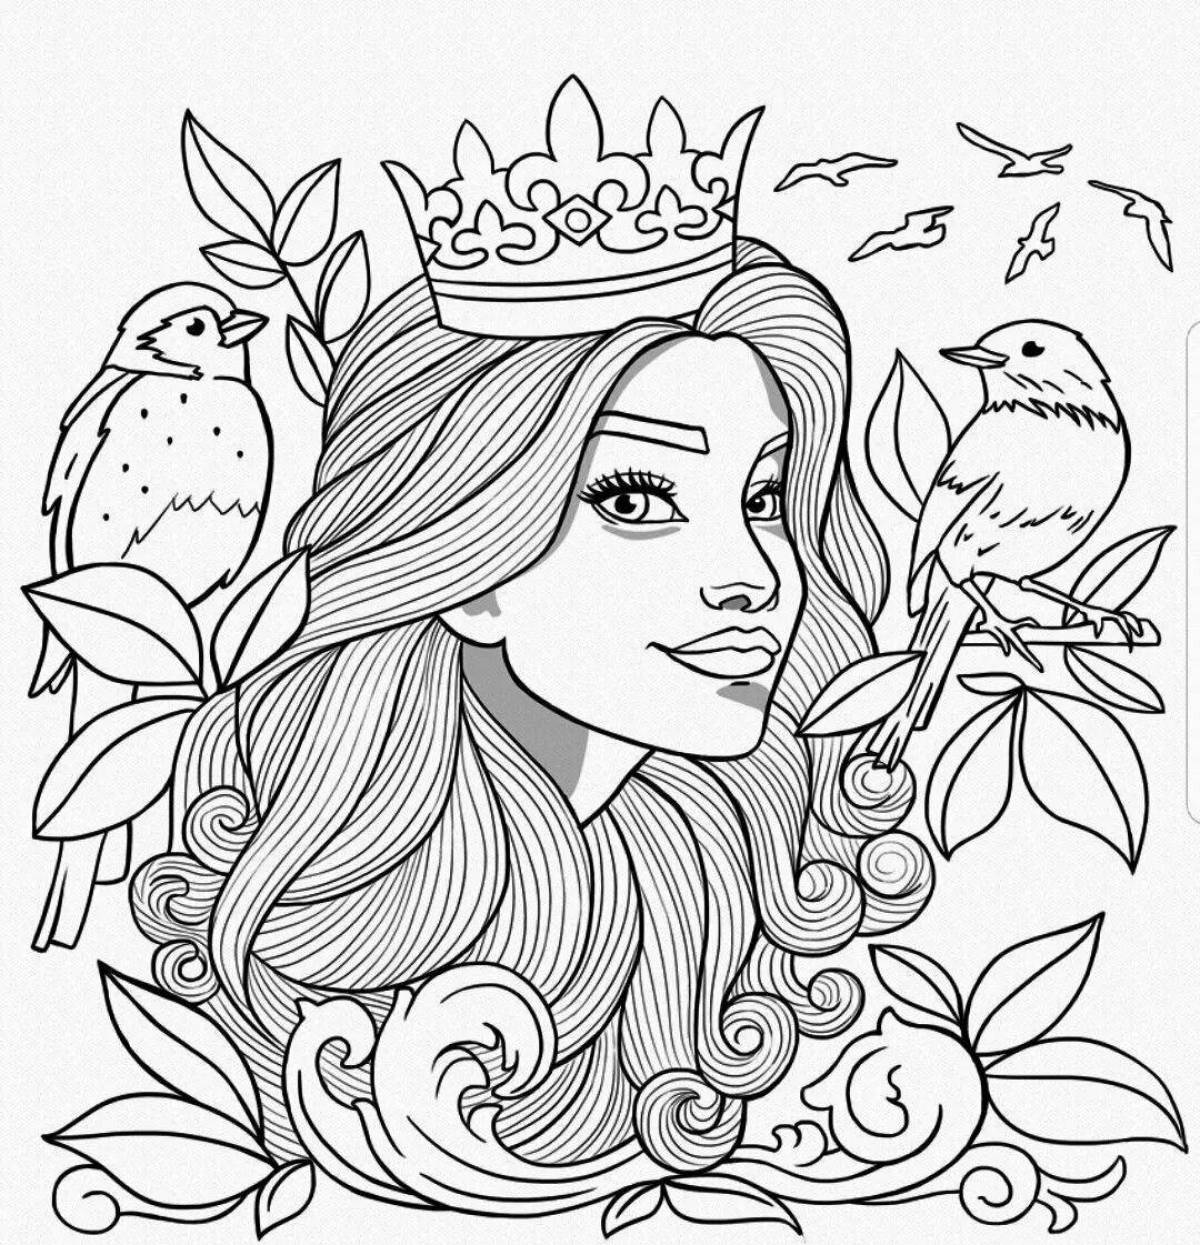 Colored coloring pages for children 12 years old